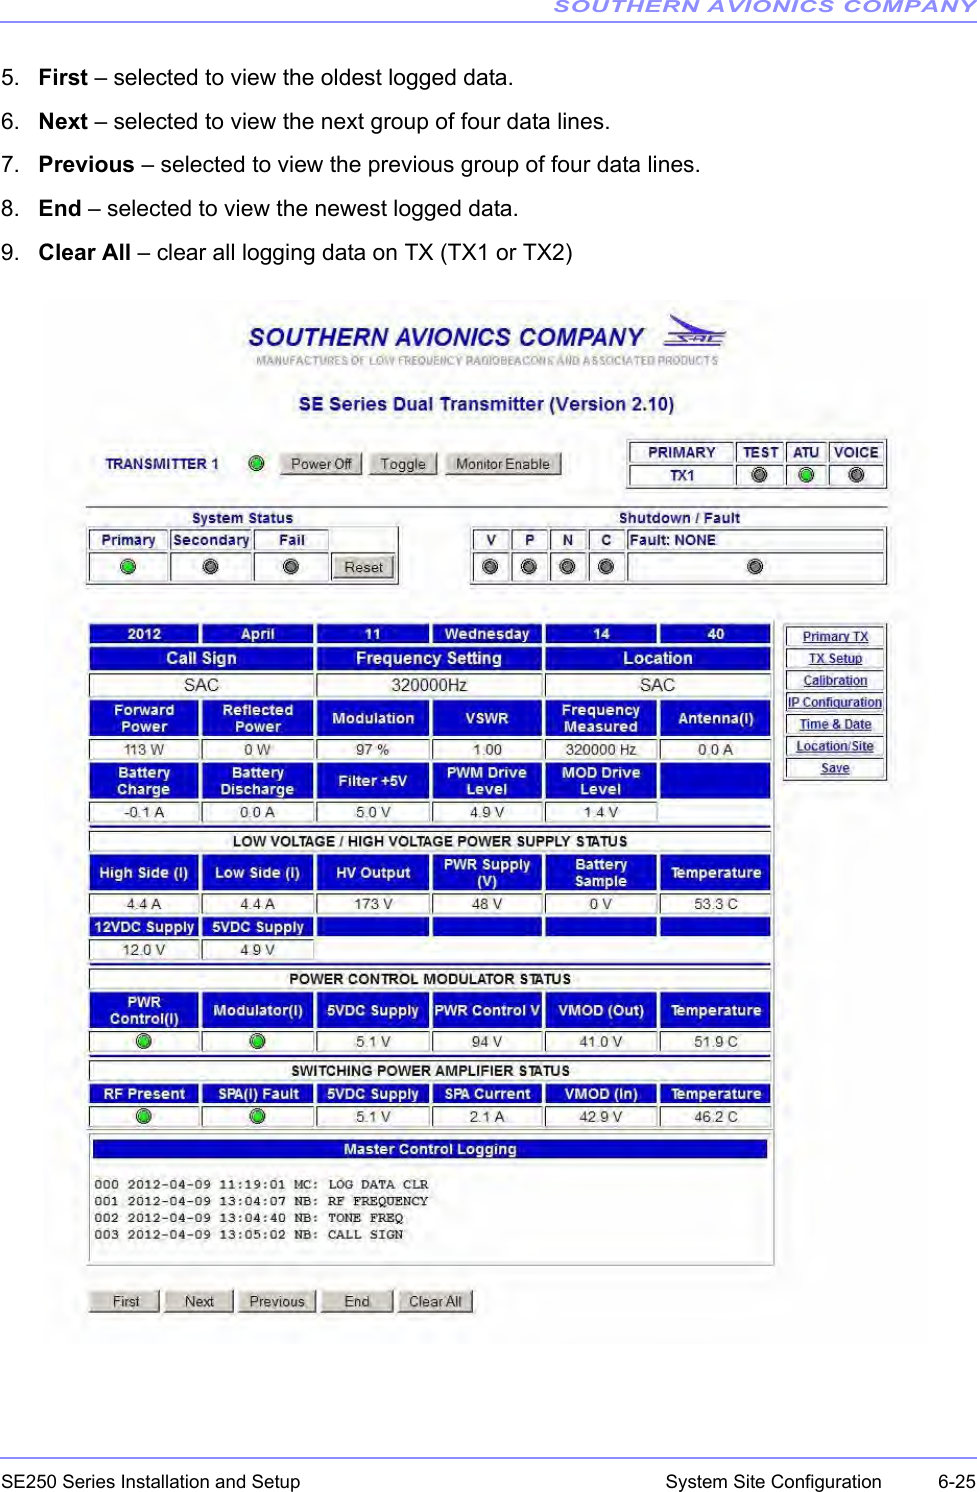 SOUTHERN AVIONICS COMPANYSE250 Series Installation and Setup  6-25System Site Configuration5. First – selected to view the oldest logged data.6. Next – selected to view the next group of four data lines.7. Previous – selected to view the previous group of four data lines.8. End – selected to view the newest logged data.9. Clear All – clear all logging data on TX (TX1 or TX2)